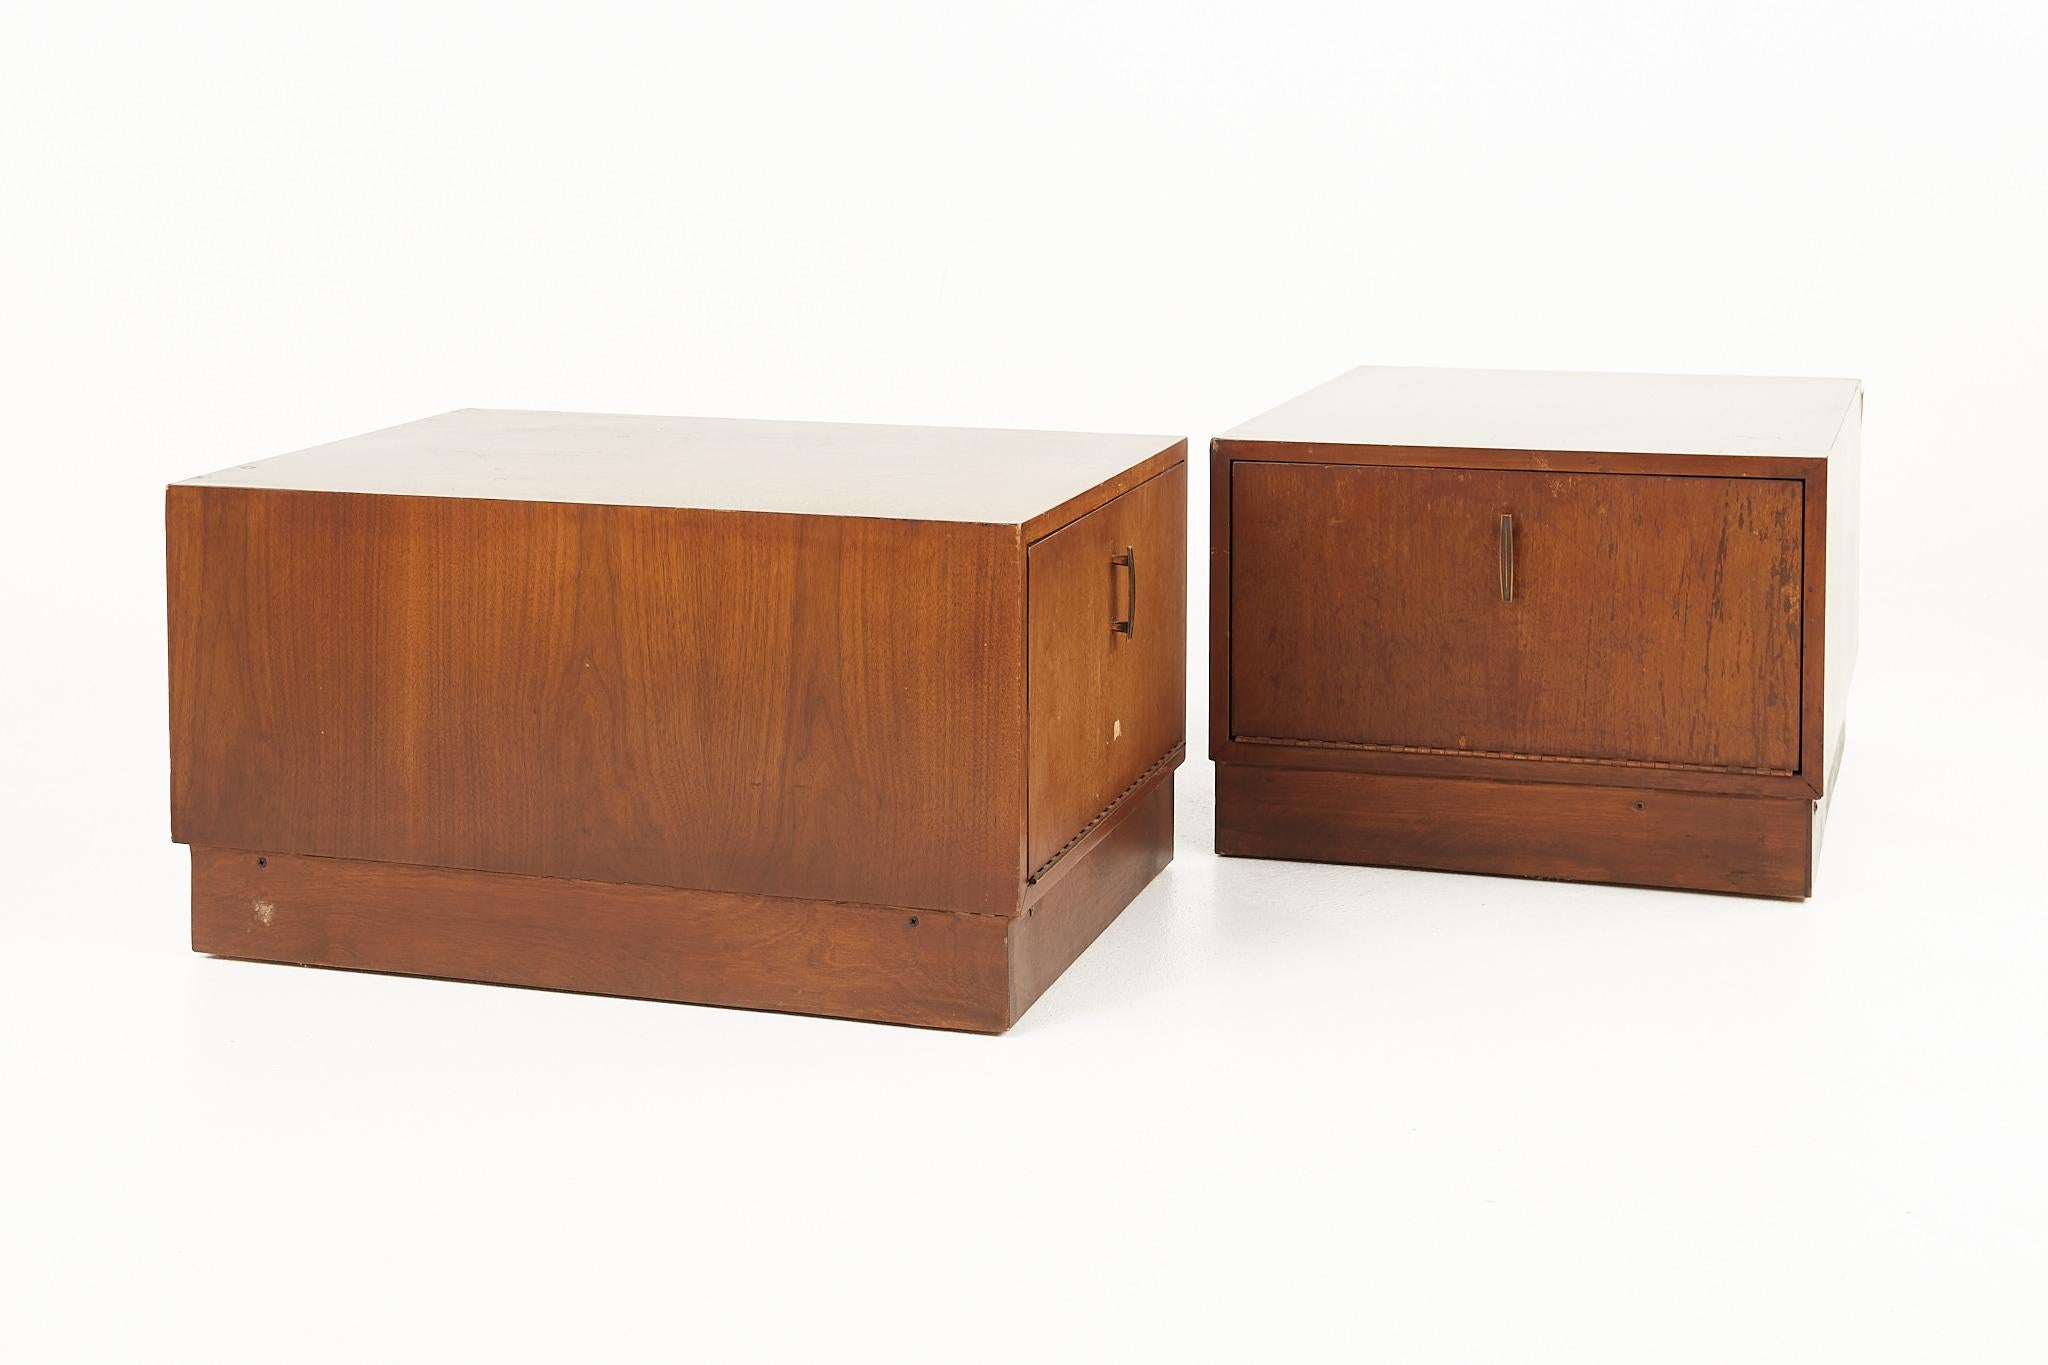 Adrian Pearsall for craft associates mid century walnut side tables - pair

Each table measures: 22 wide x 29.25 deep x 16 inches high

All pieces of furniture can be had in what we call restored vintage condition. That means the piece is